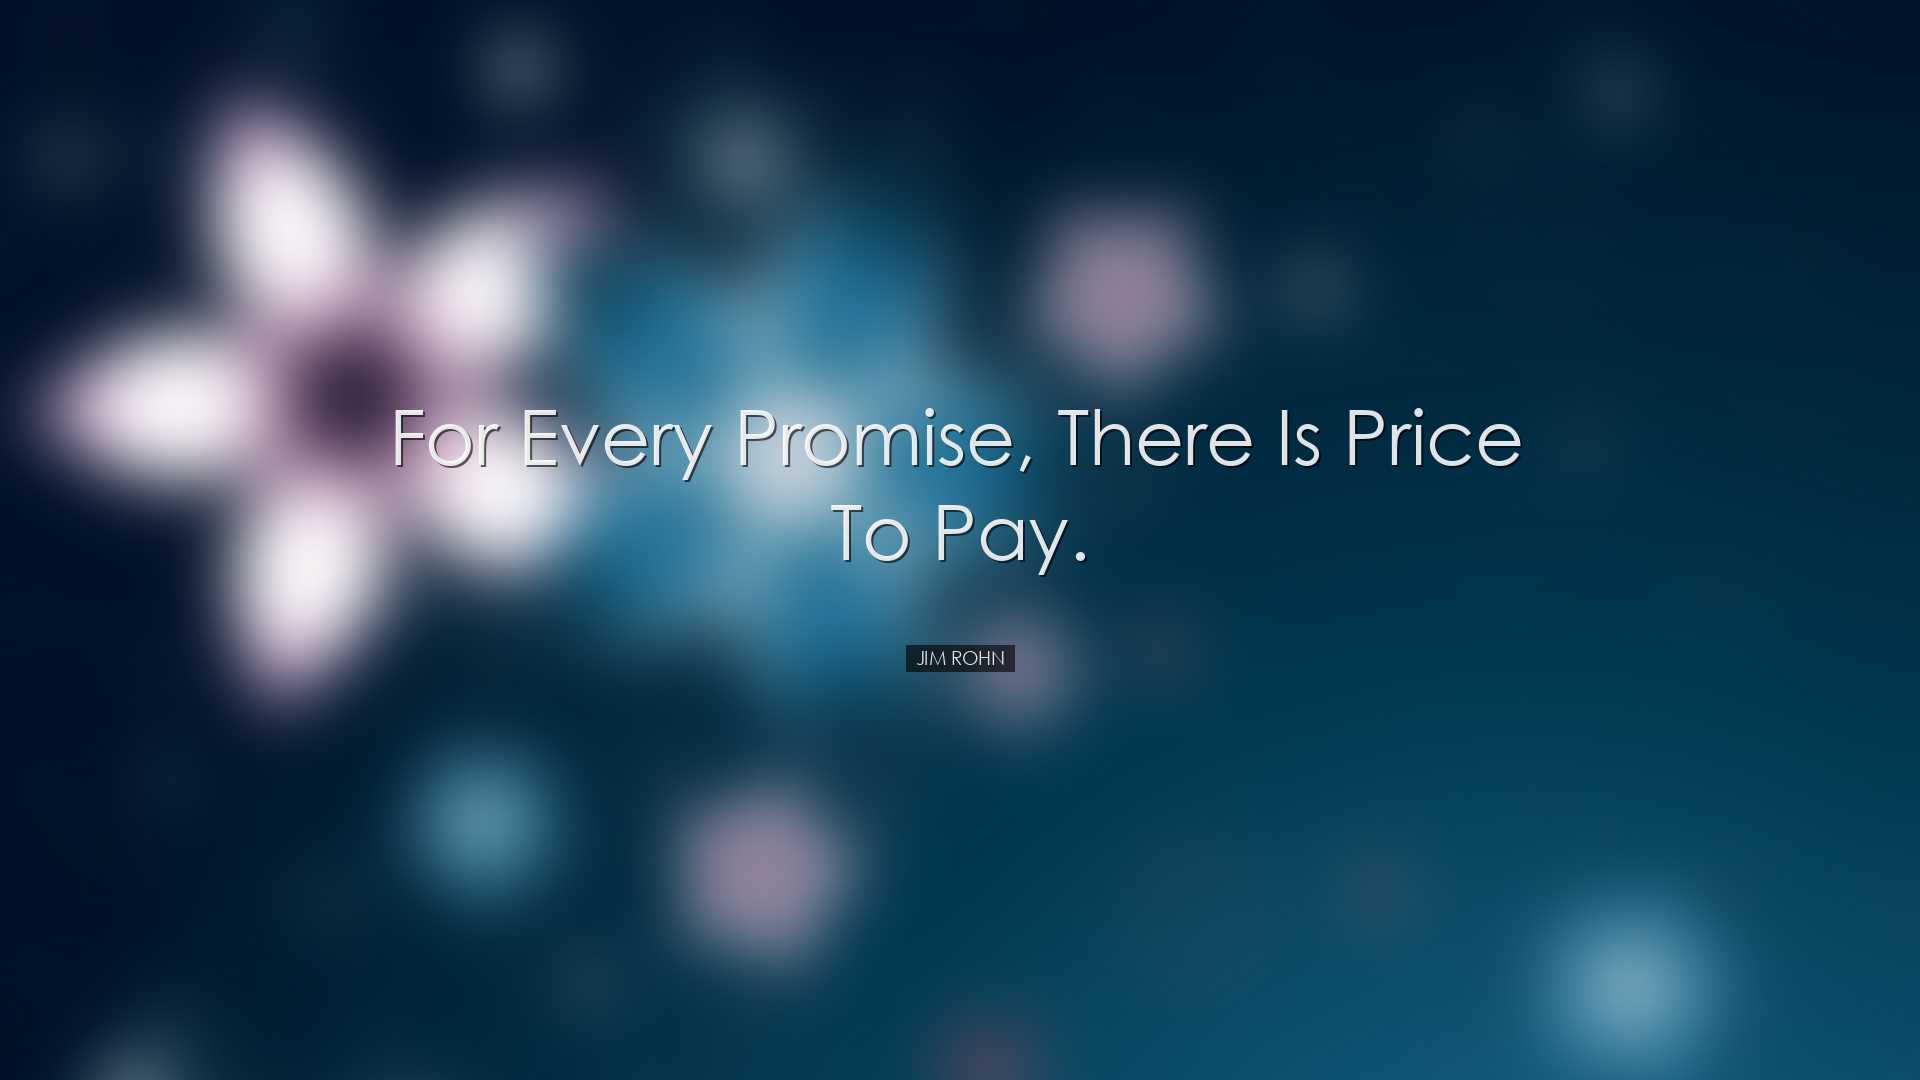 For every promise, there is price to pay. - Jim Rohn